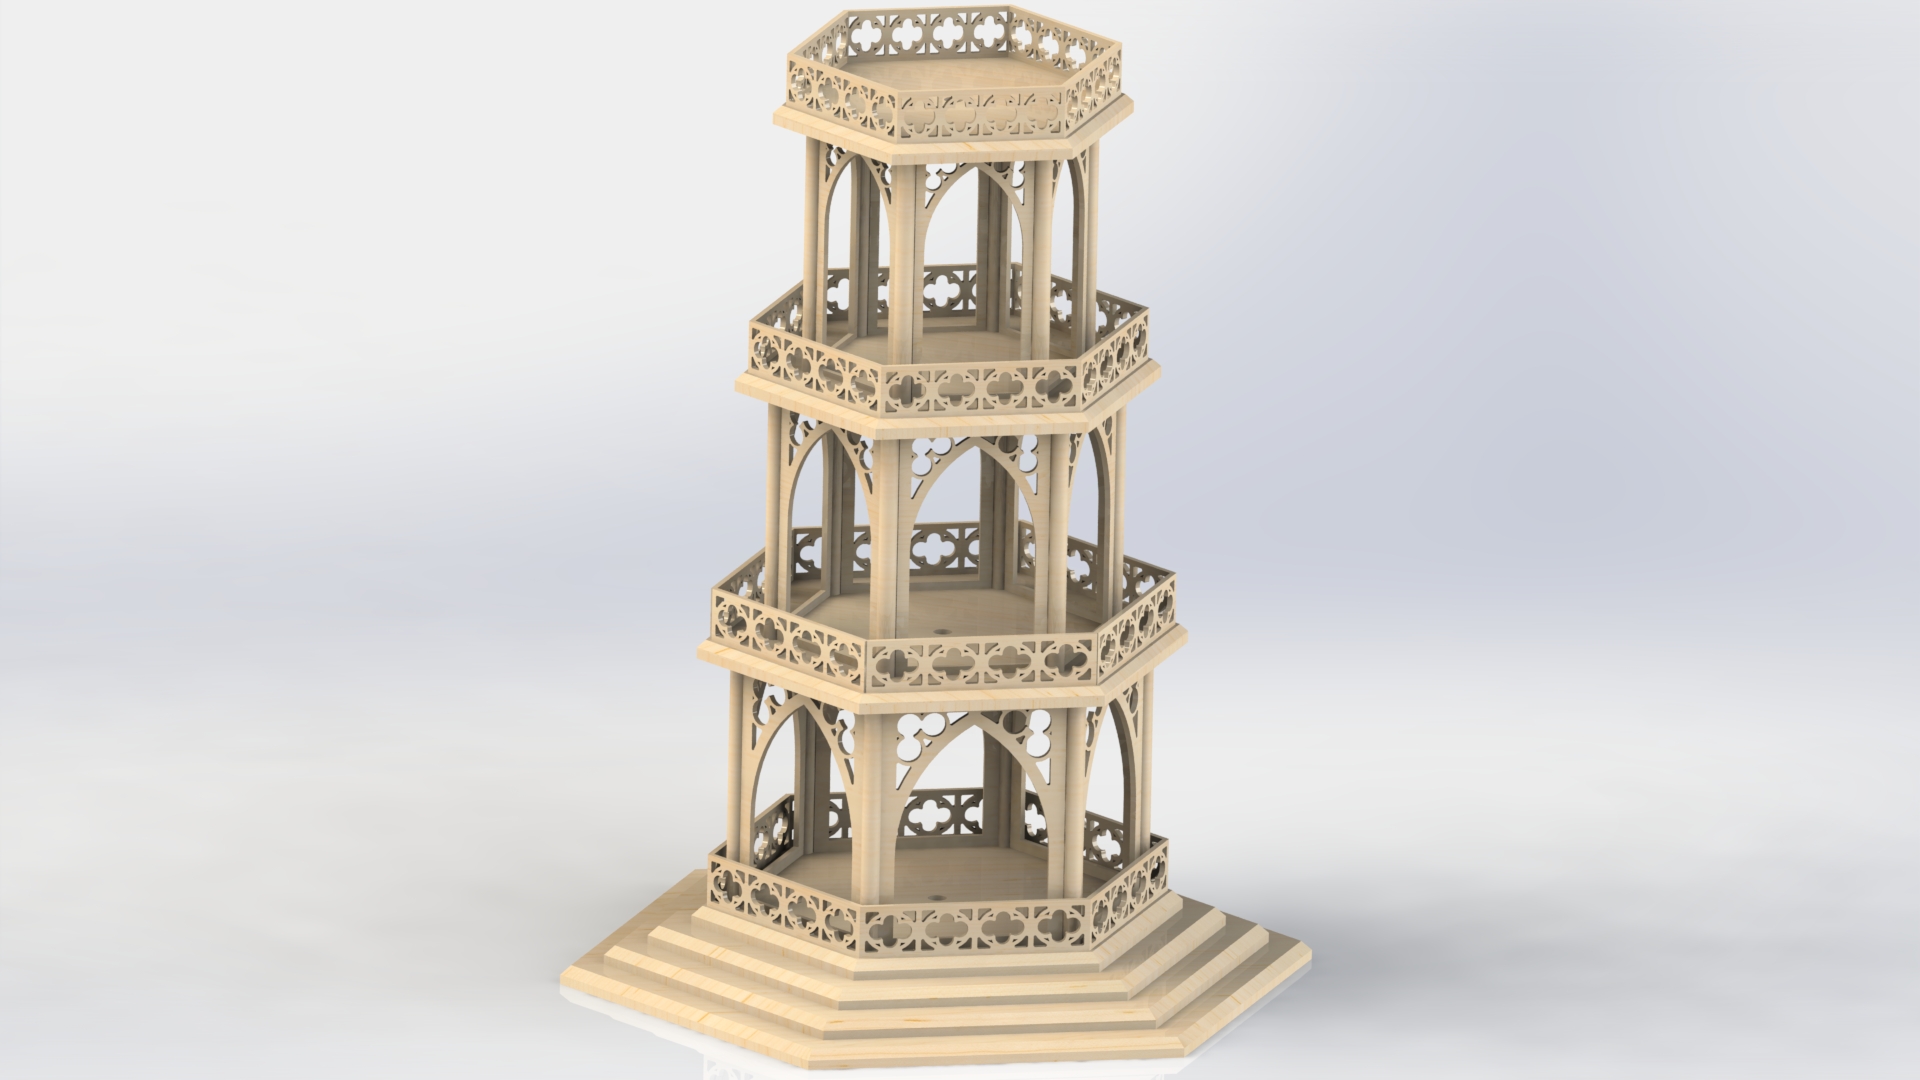 the wooden model shows the various levels and structures